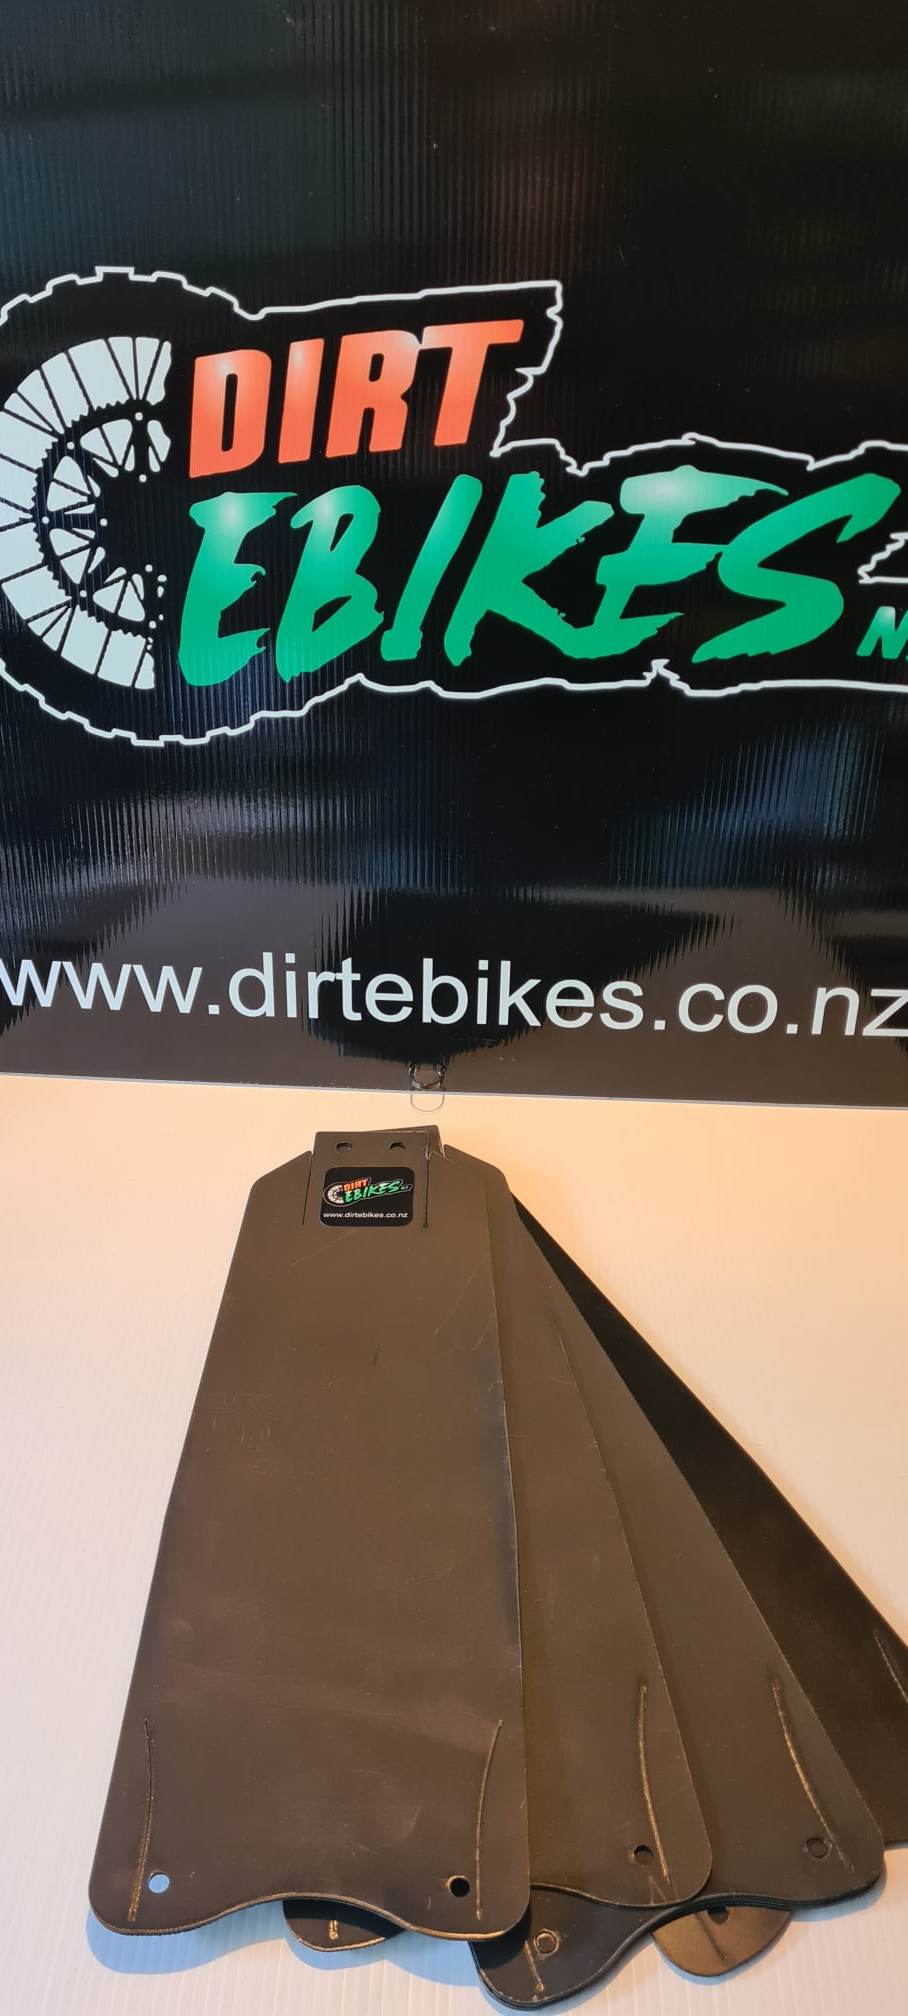 Dirt eBikes NZ Sur-ron PPE shock assembly cover longer version for seat risers